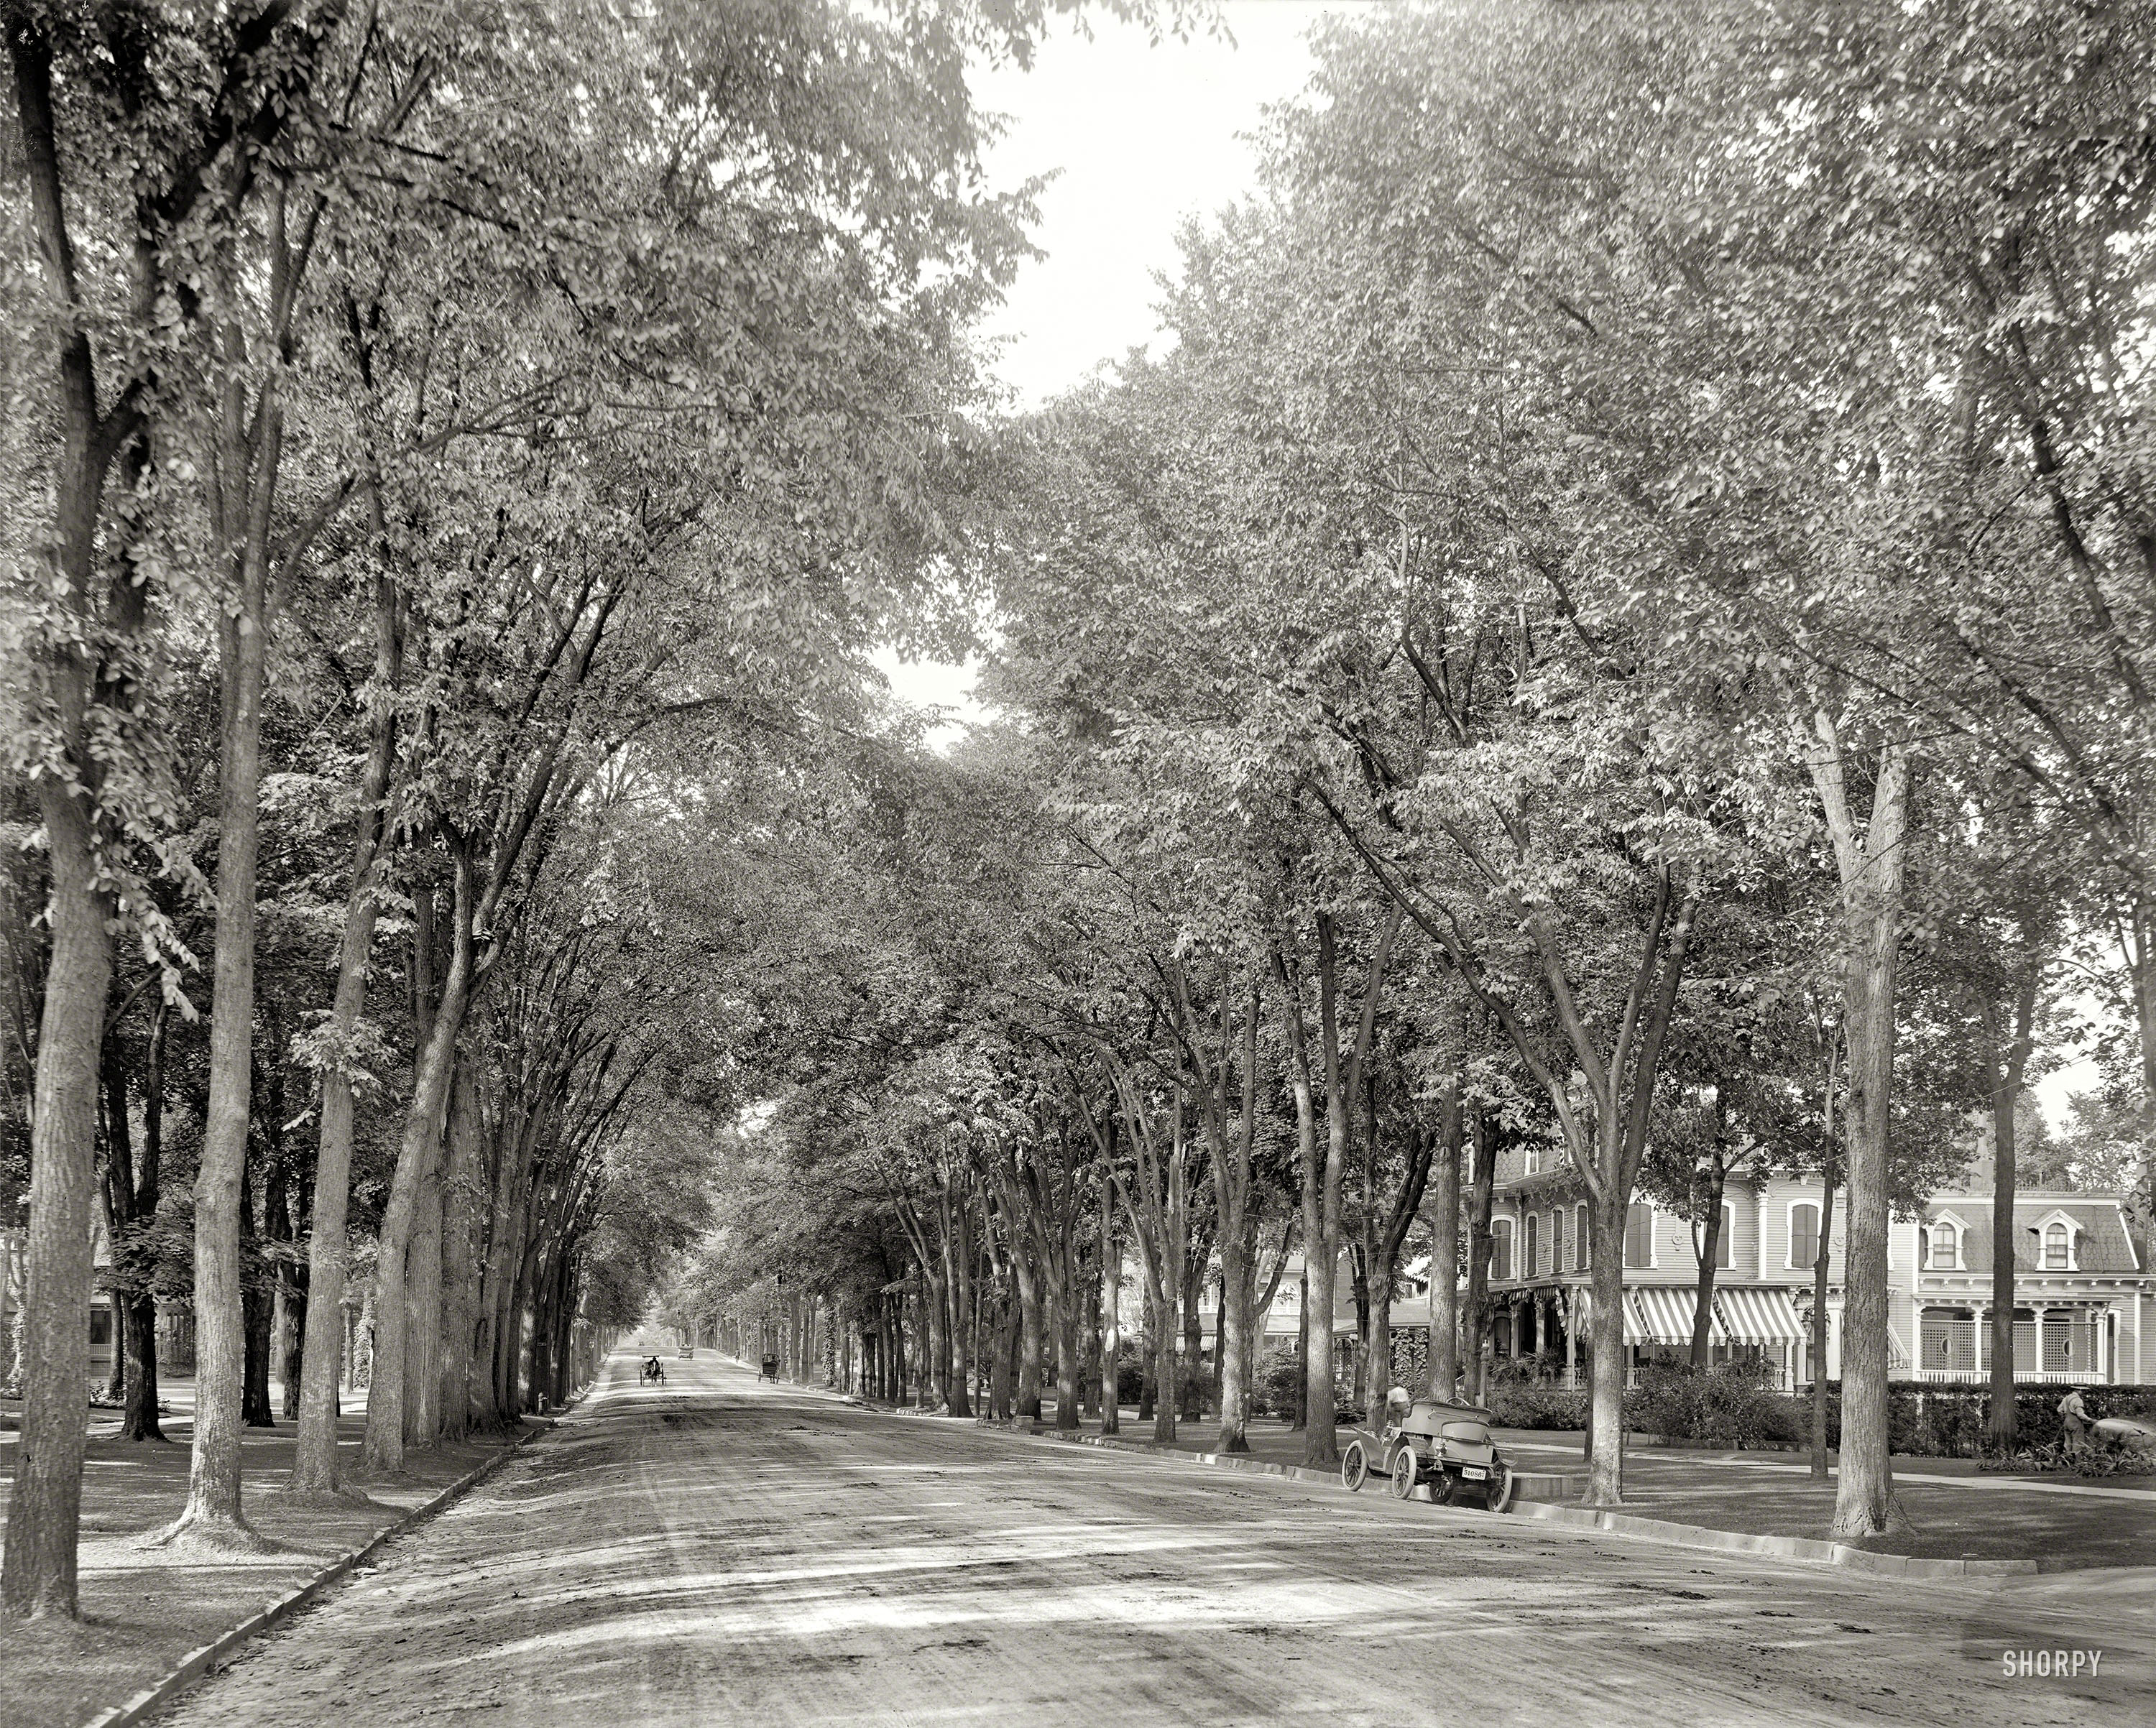 Circa 1908. "North Broadway, Saratoga Springs, N.Y." 8x10 inch dry plate glass negative, Detroit Publishing Company. View full size.